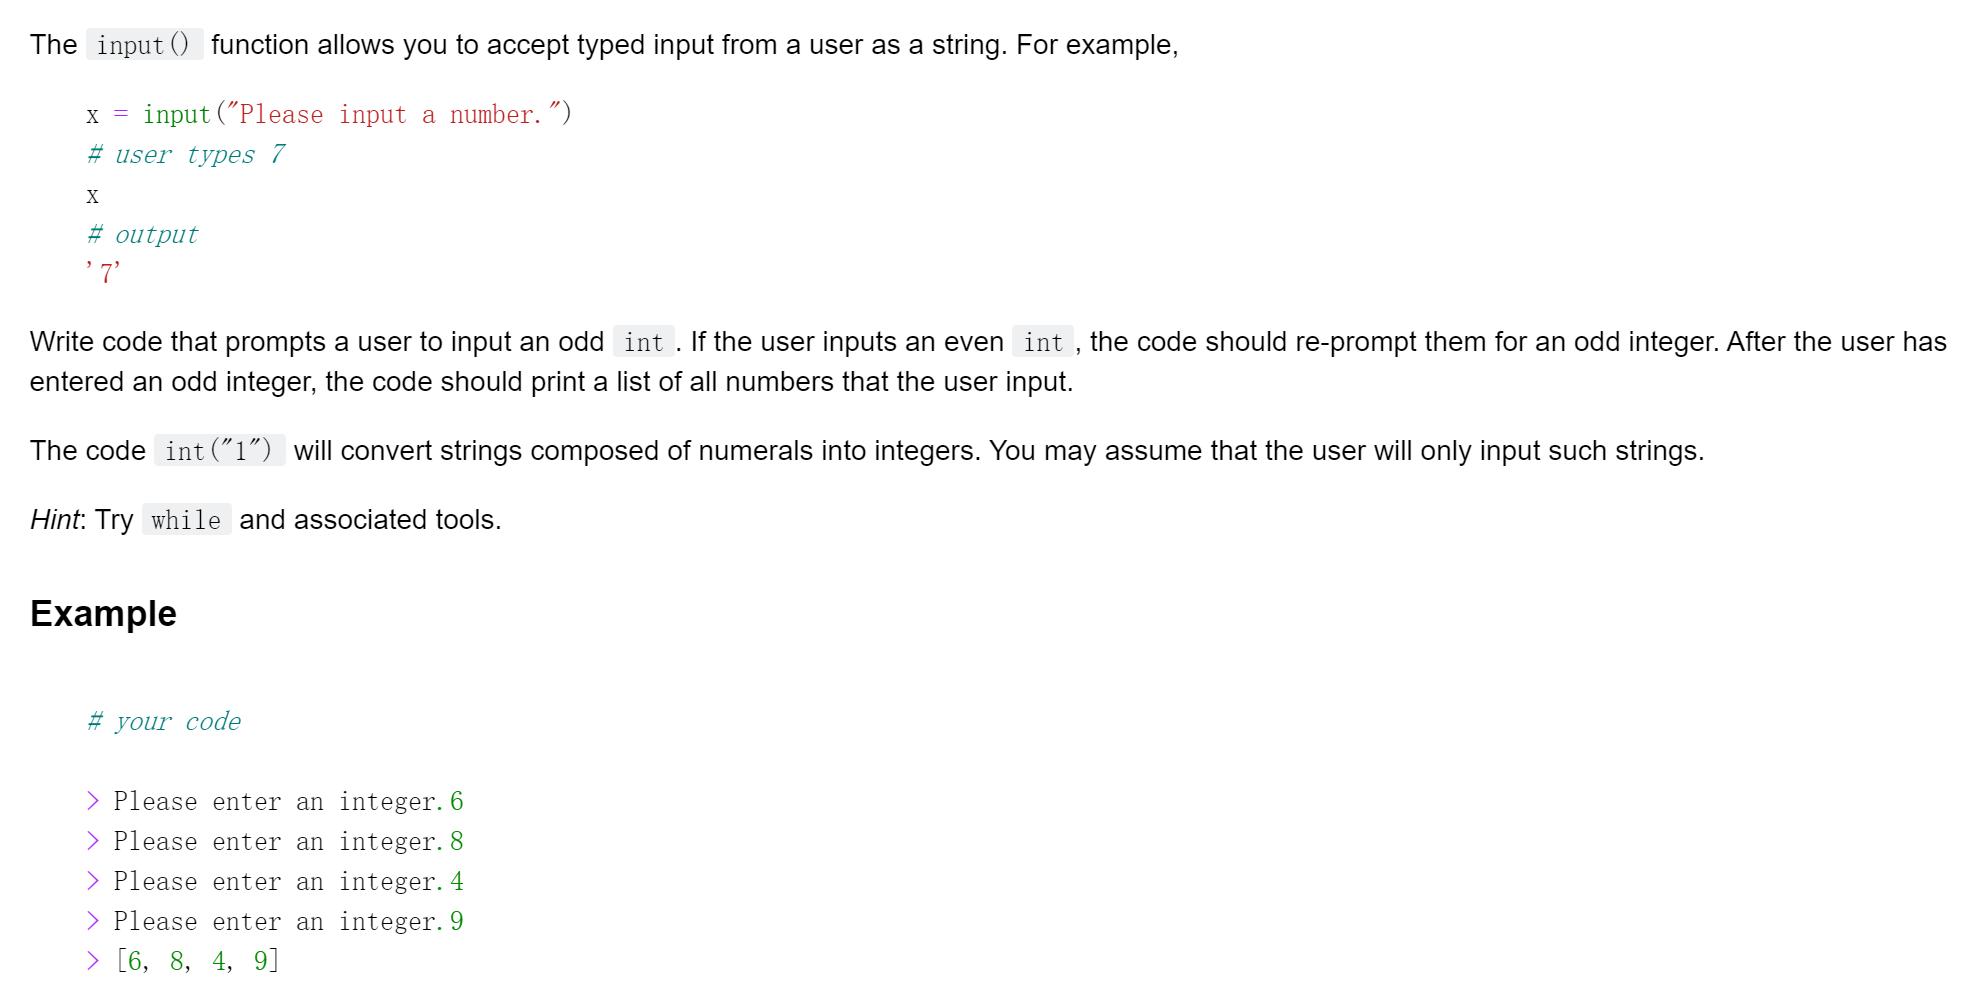 The input () function allows you to accept typed input from a user as a string. For example, X = input